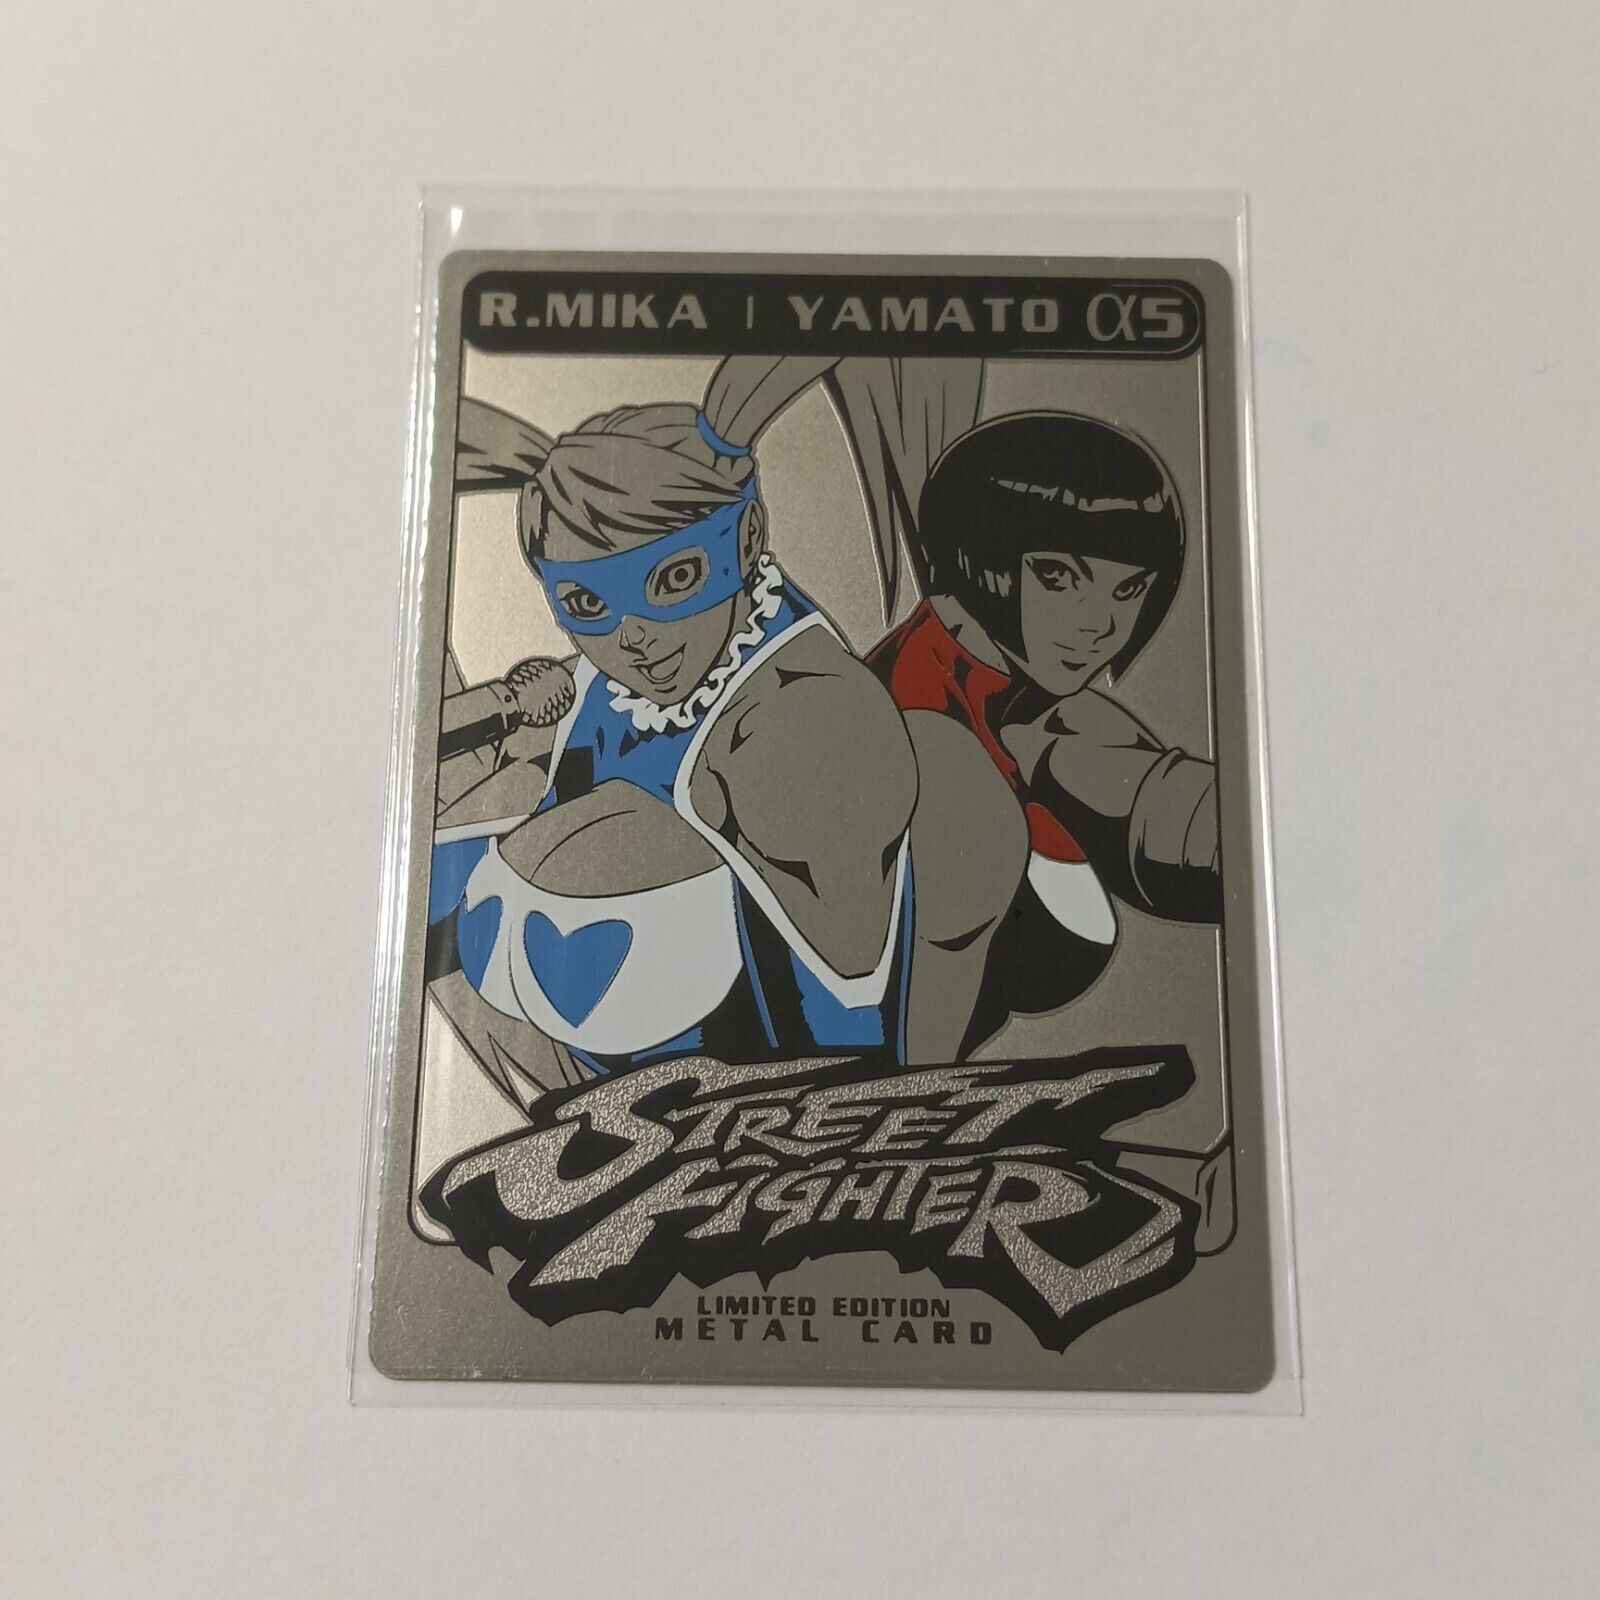 Artist Signed Udon 2018 SDCC Street Fighter R. Mika / Yamato Metal Card Long Vo